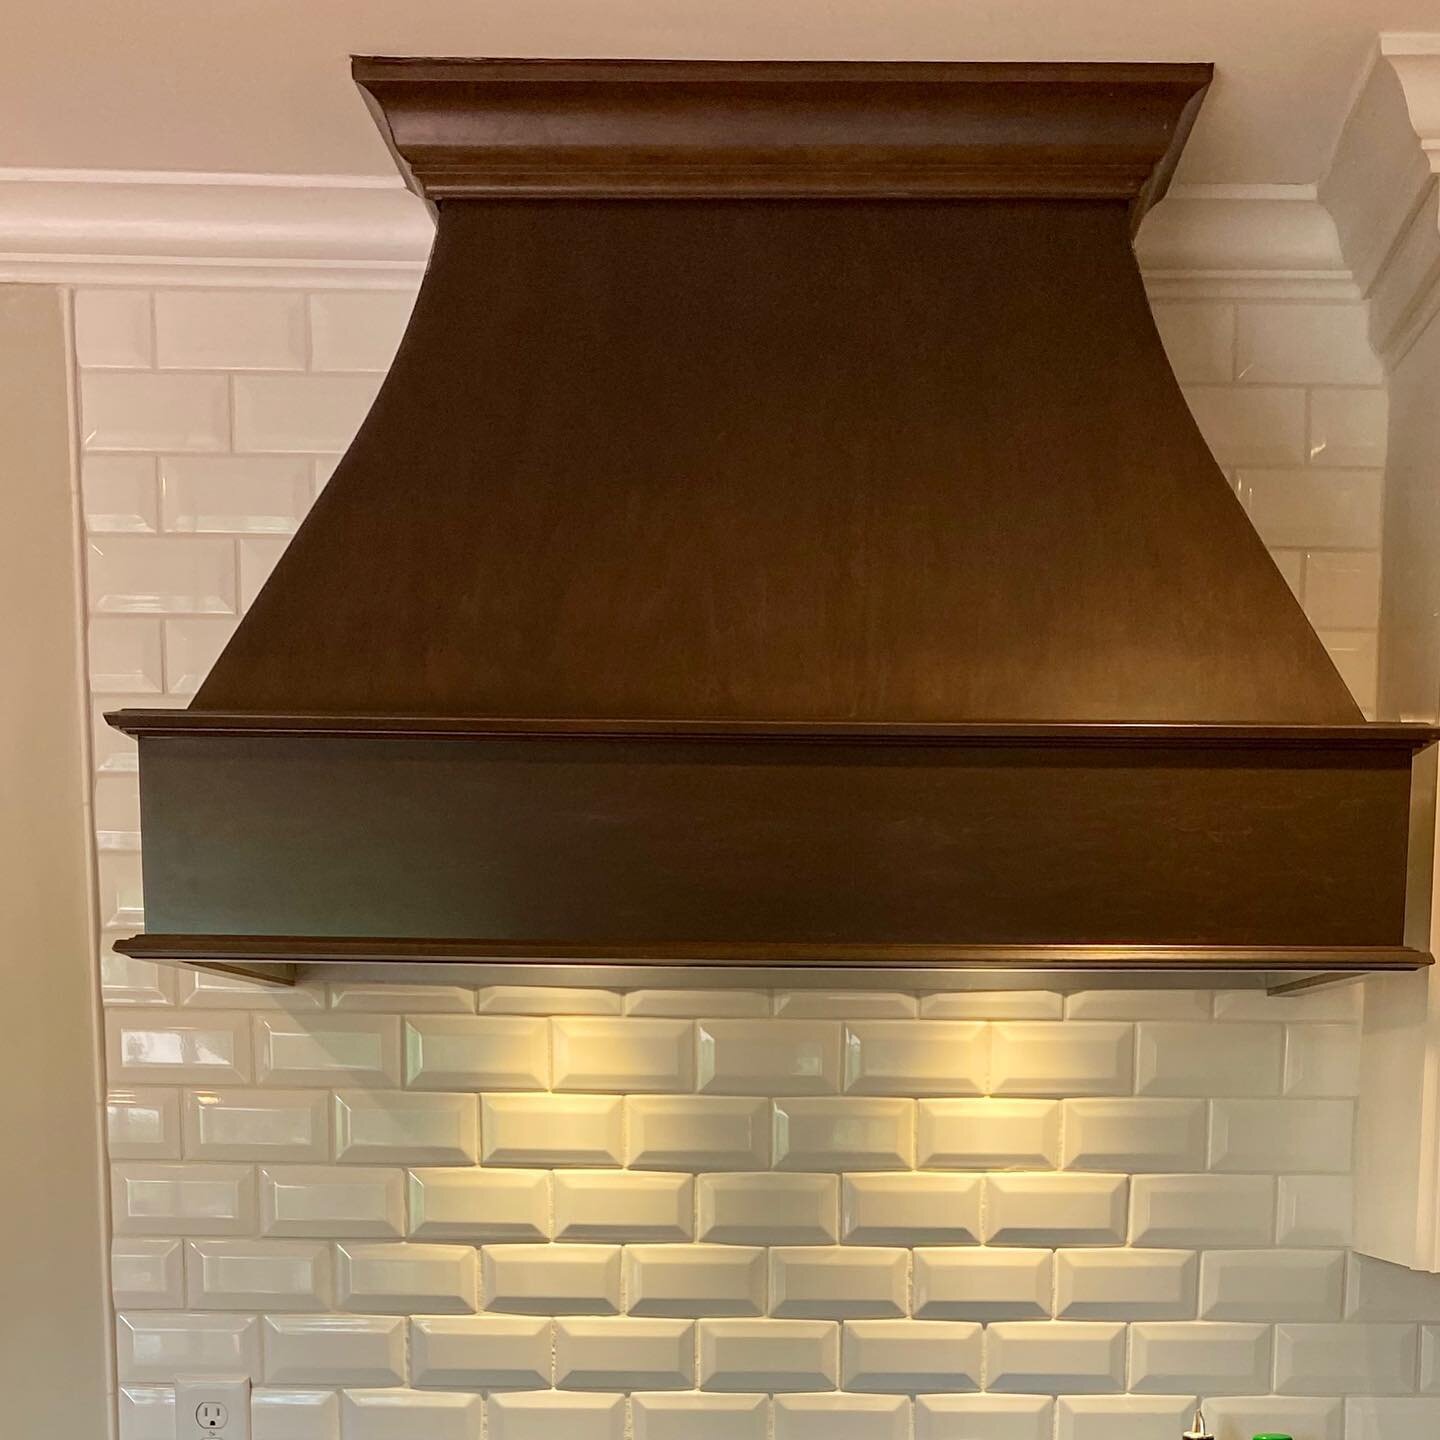 How amazing is this custom built range hood by Charles West our senior cabinet builder at Cormans.  The detail is amazing.  If you dream it, we can build it, or I should say Charles can build it!!